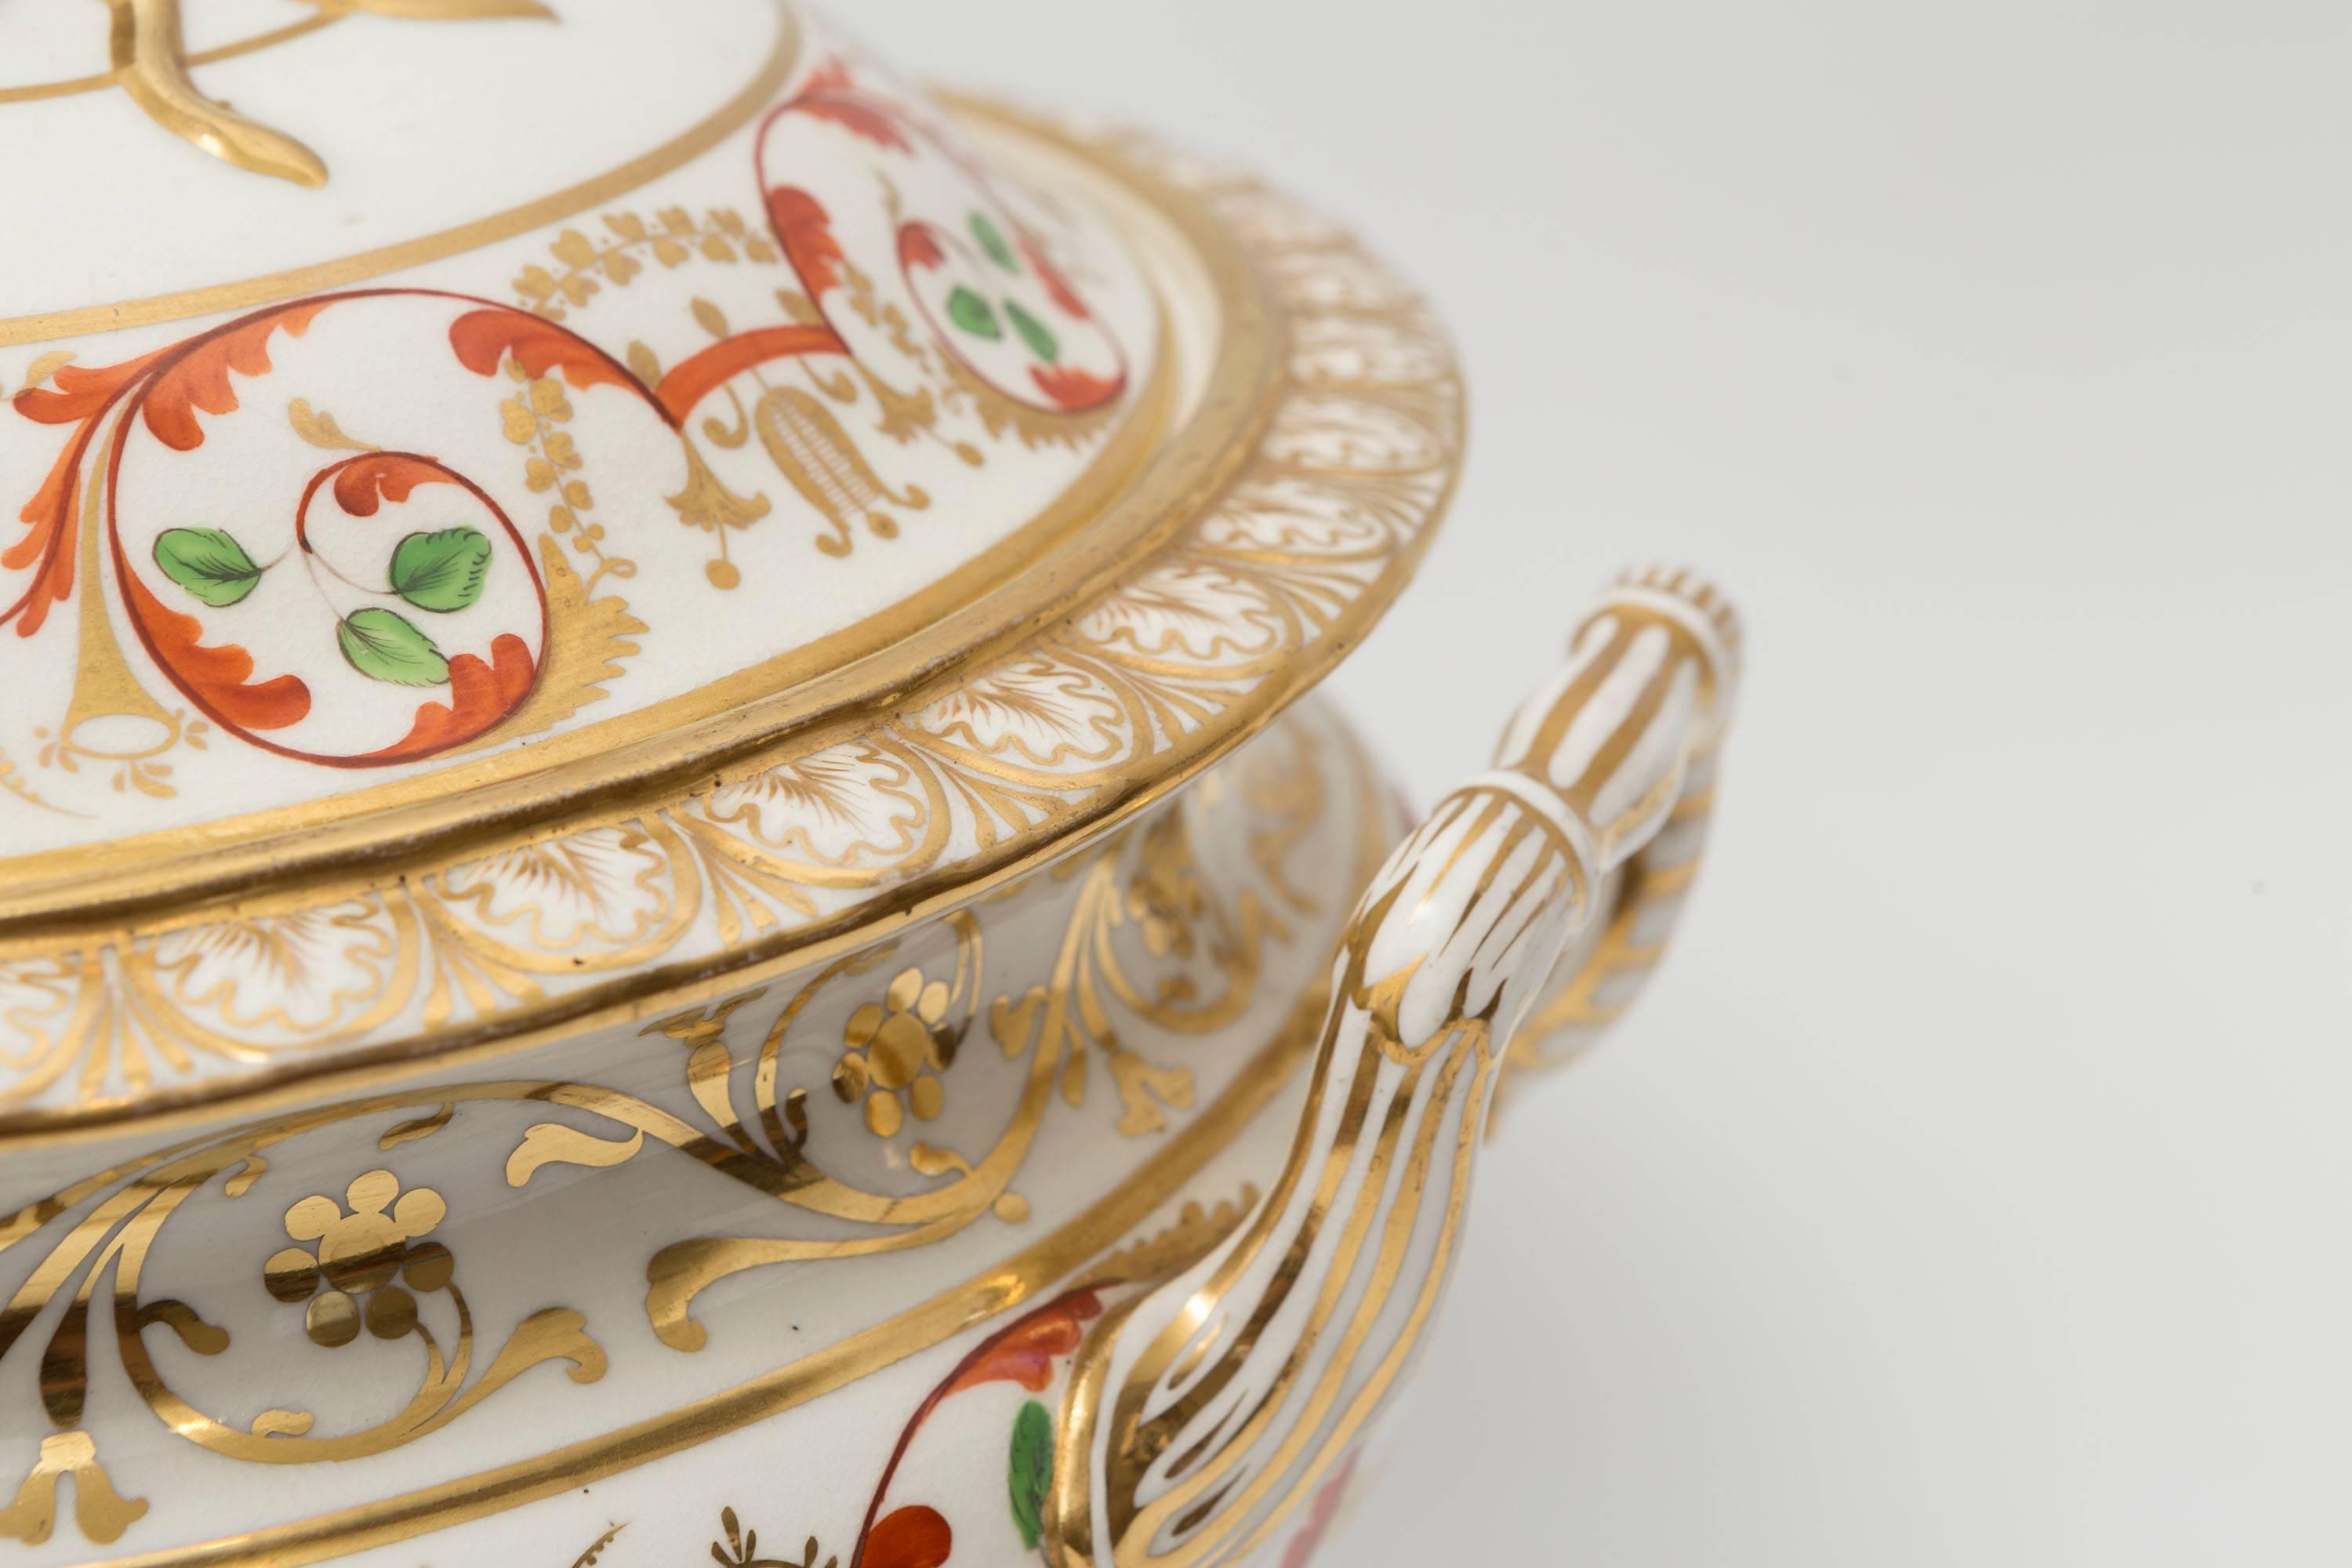 Antique English derby soup tureen. In shades of orange, green and gold